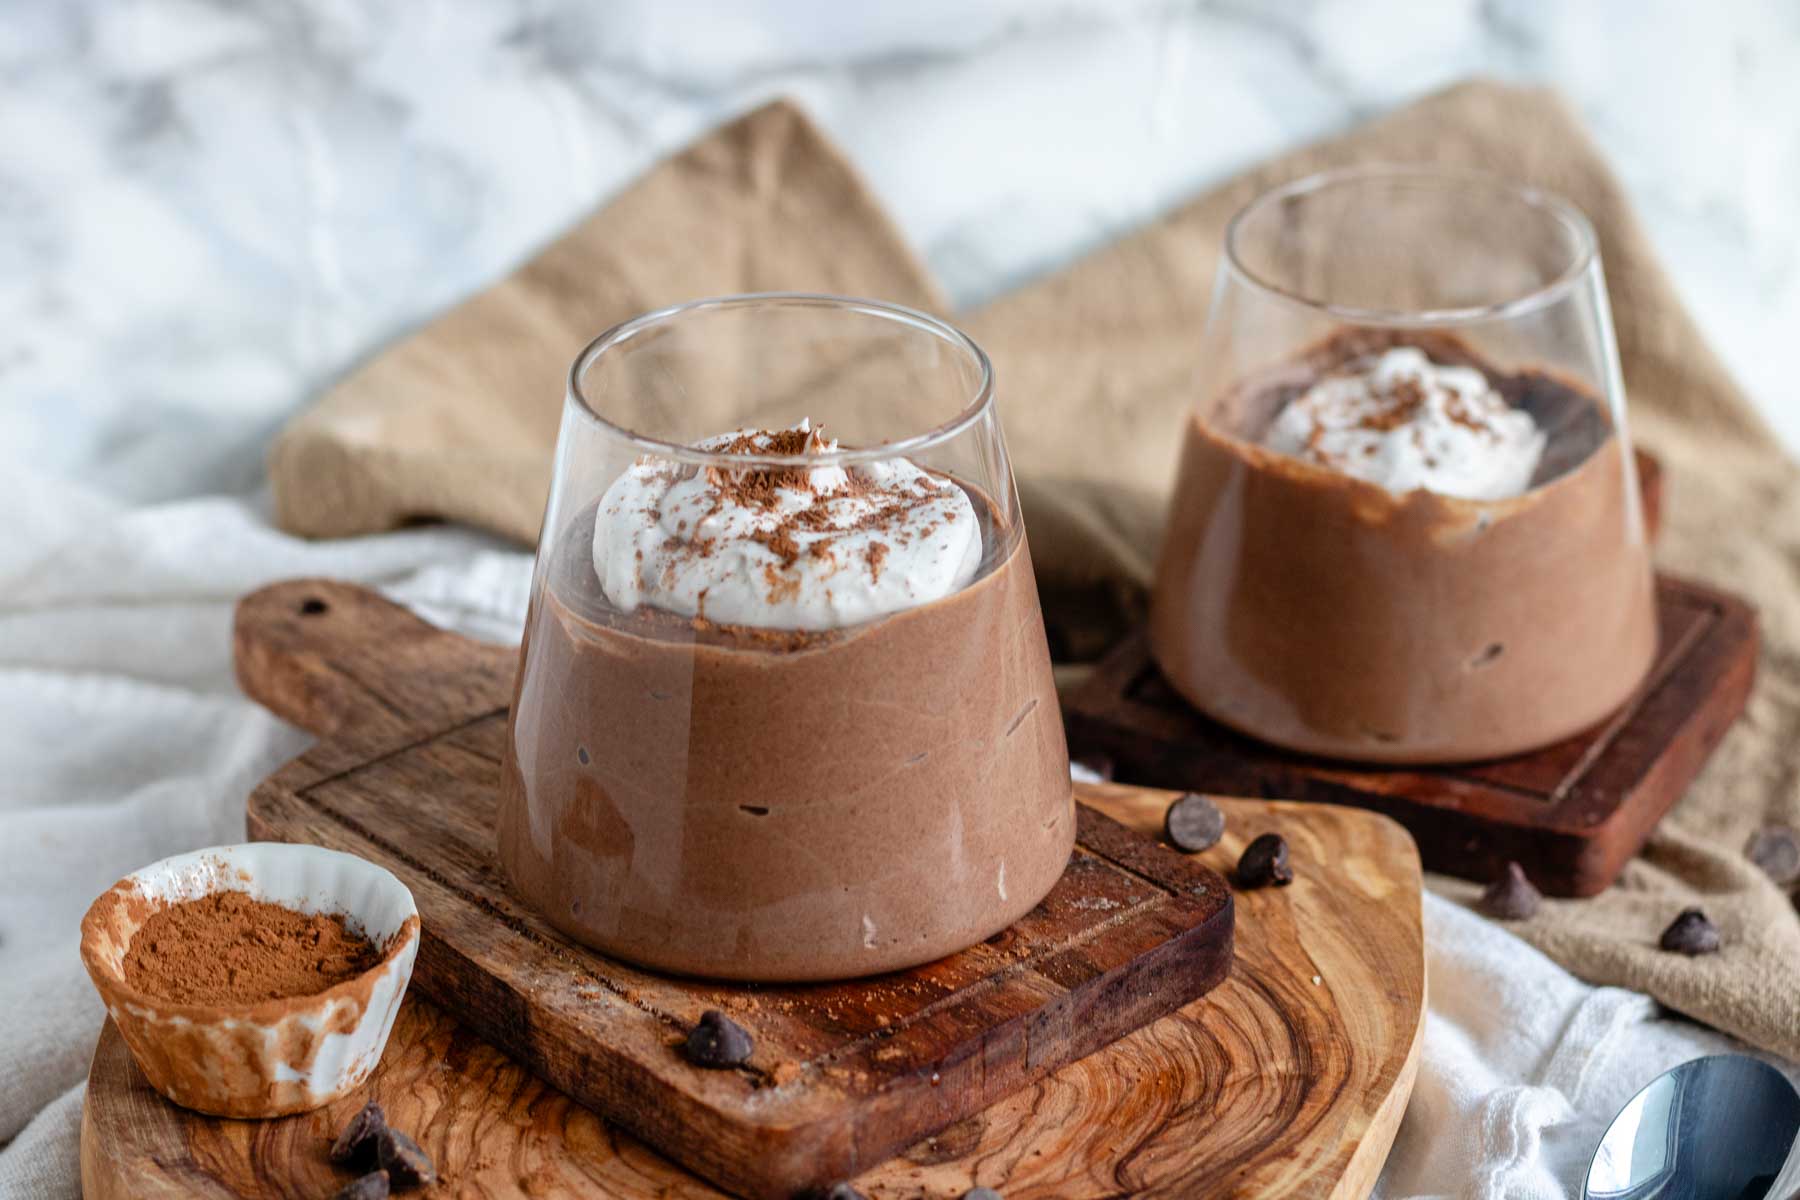 Chocolate tofu pudding with coconut whip in a glass on a wooden board.